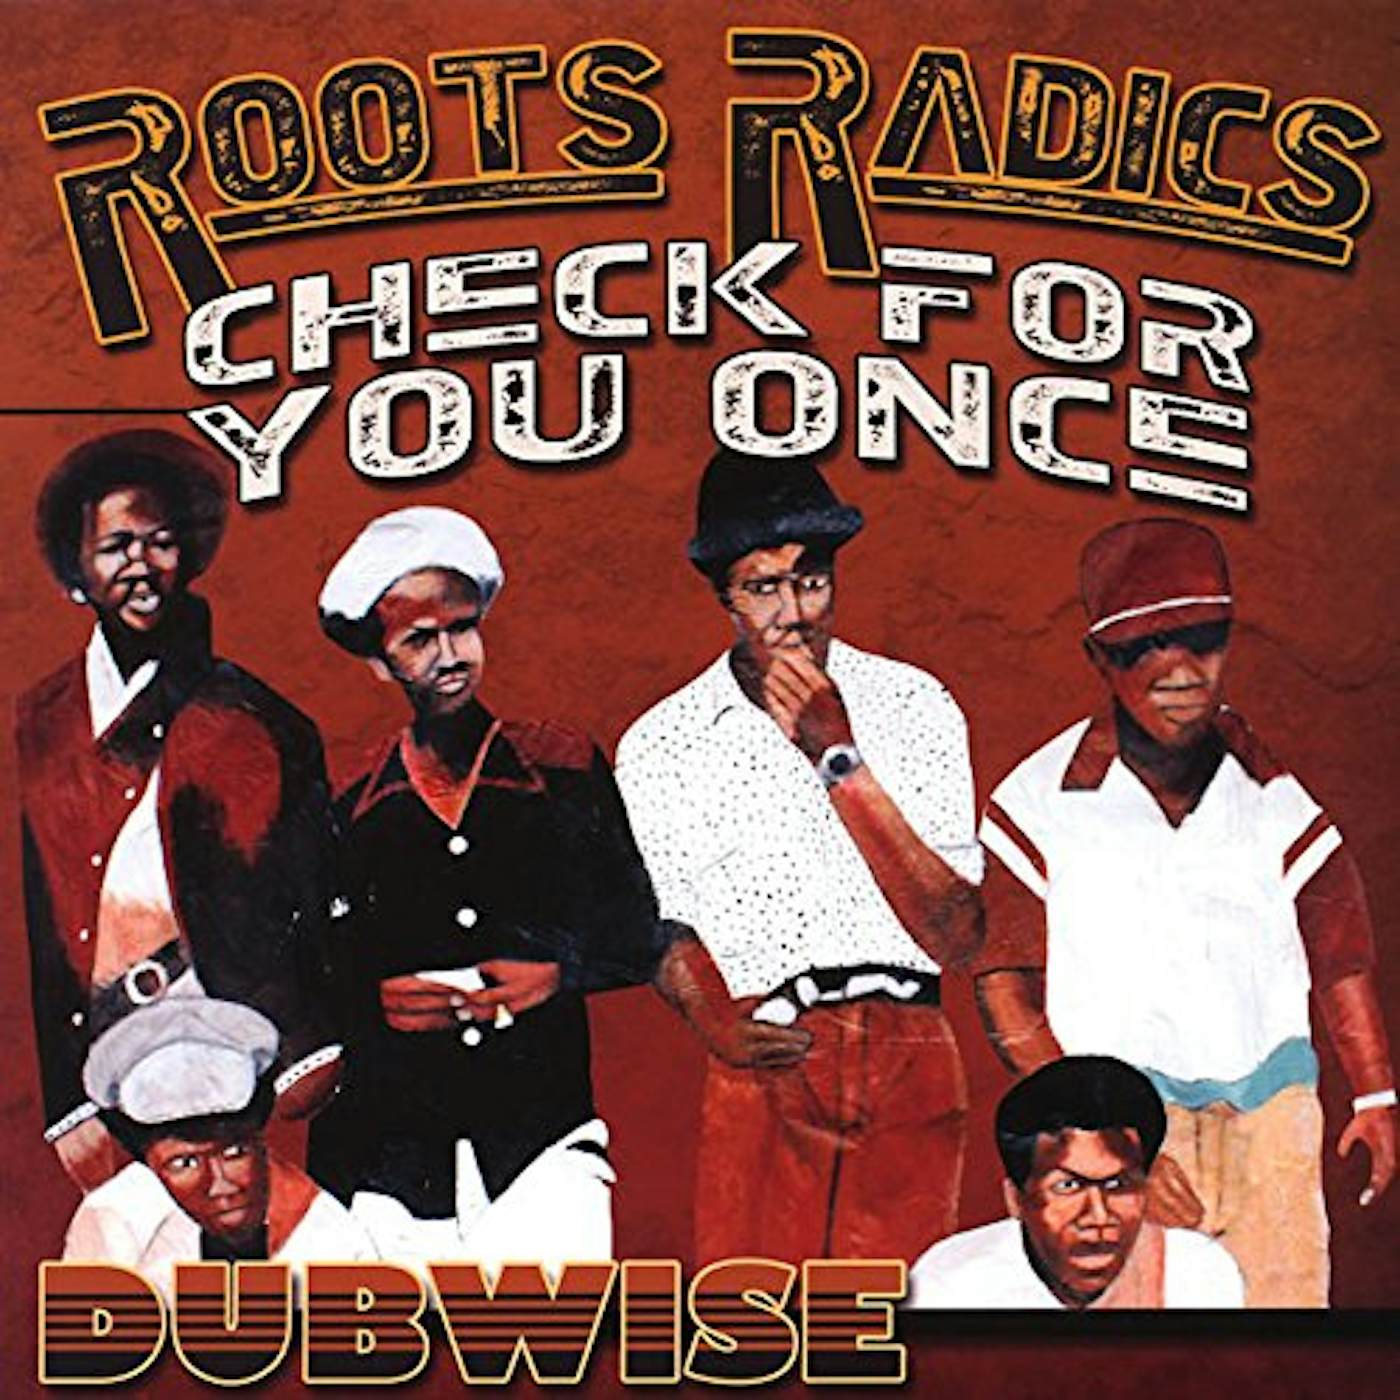 Roots Radics CHECK FOR YOU ONCE - DUBWISE Vinyl Record